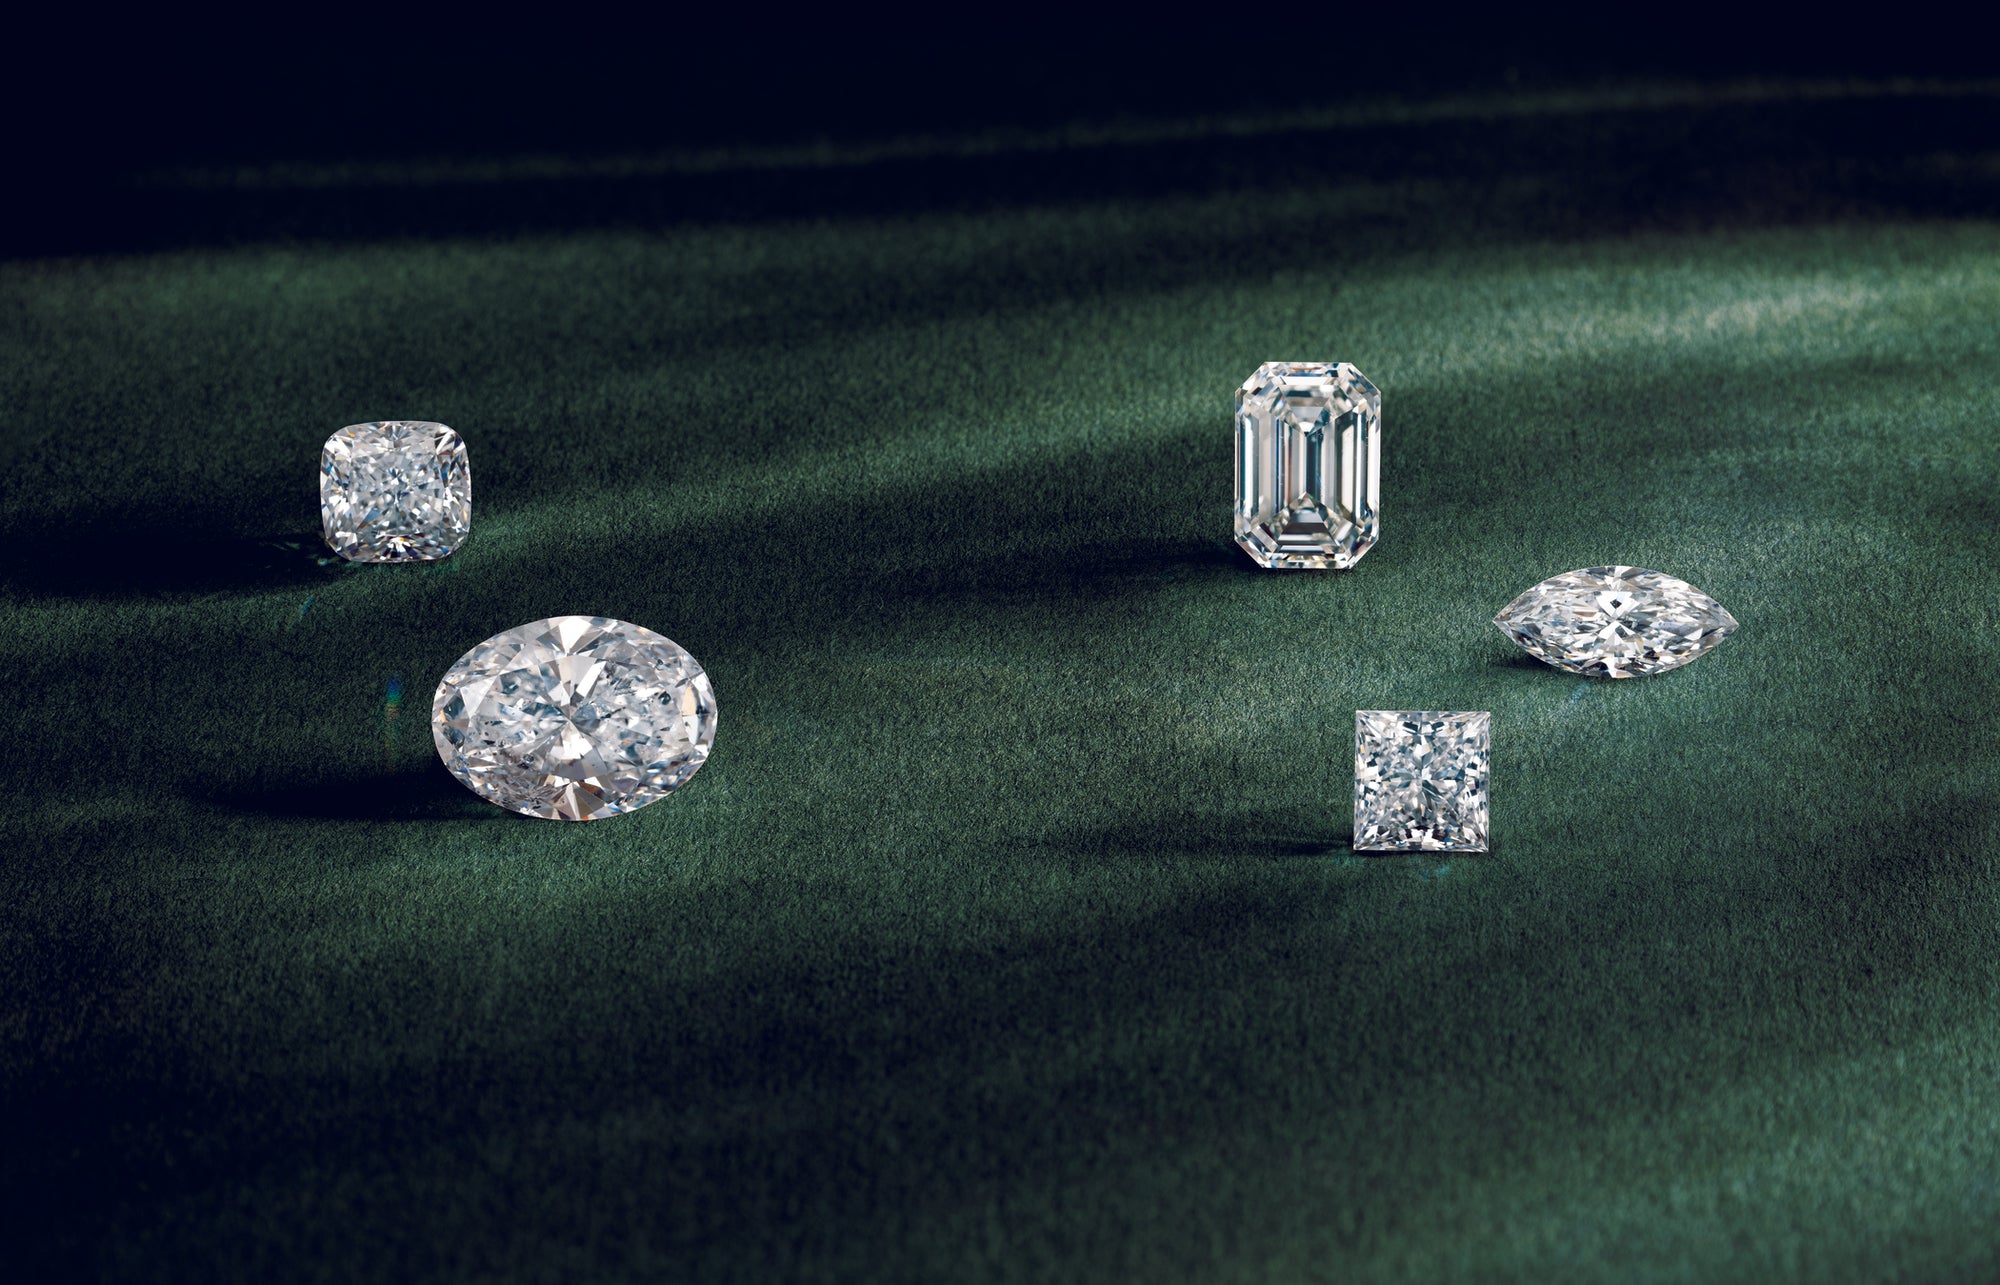 Are Diamonds Ethical?